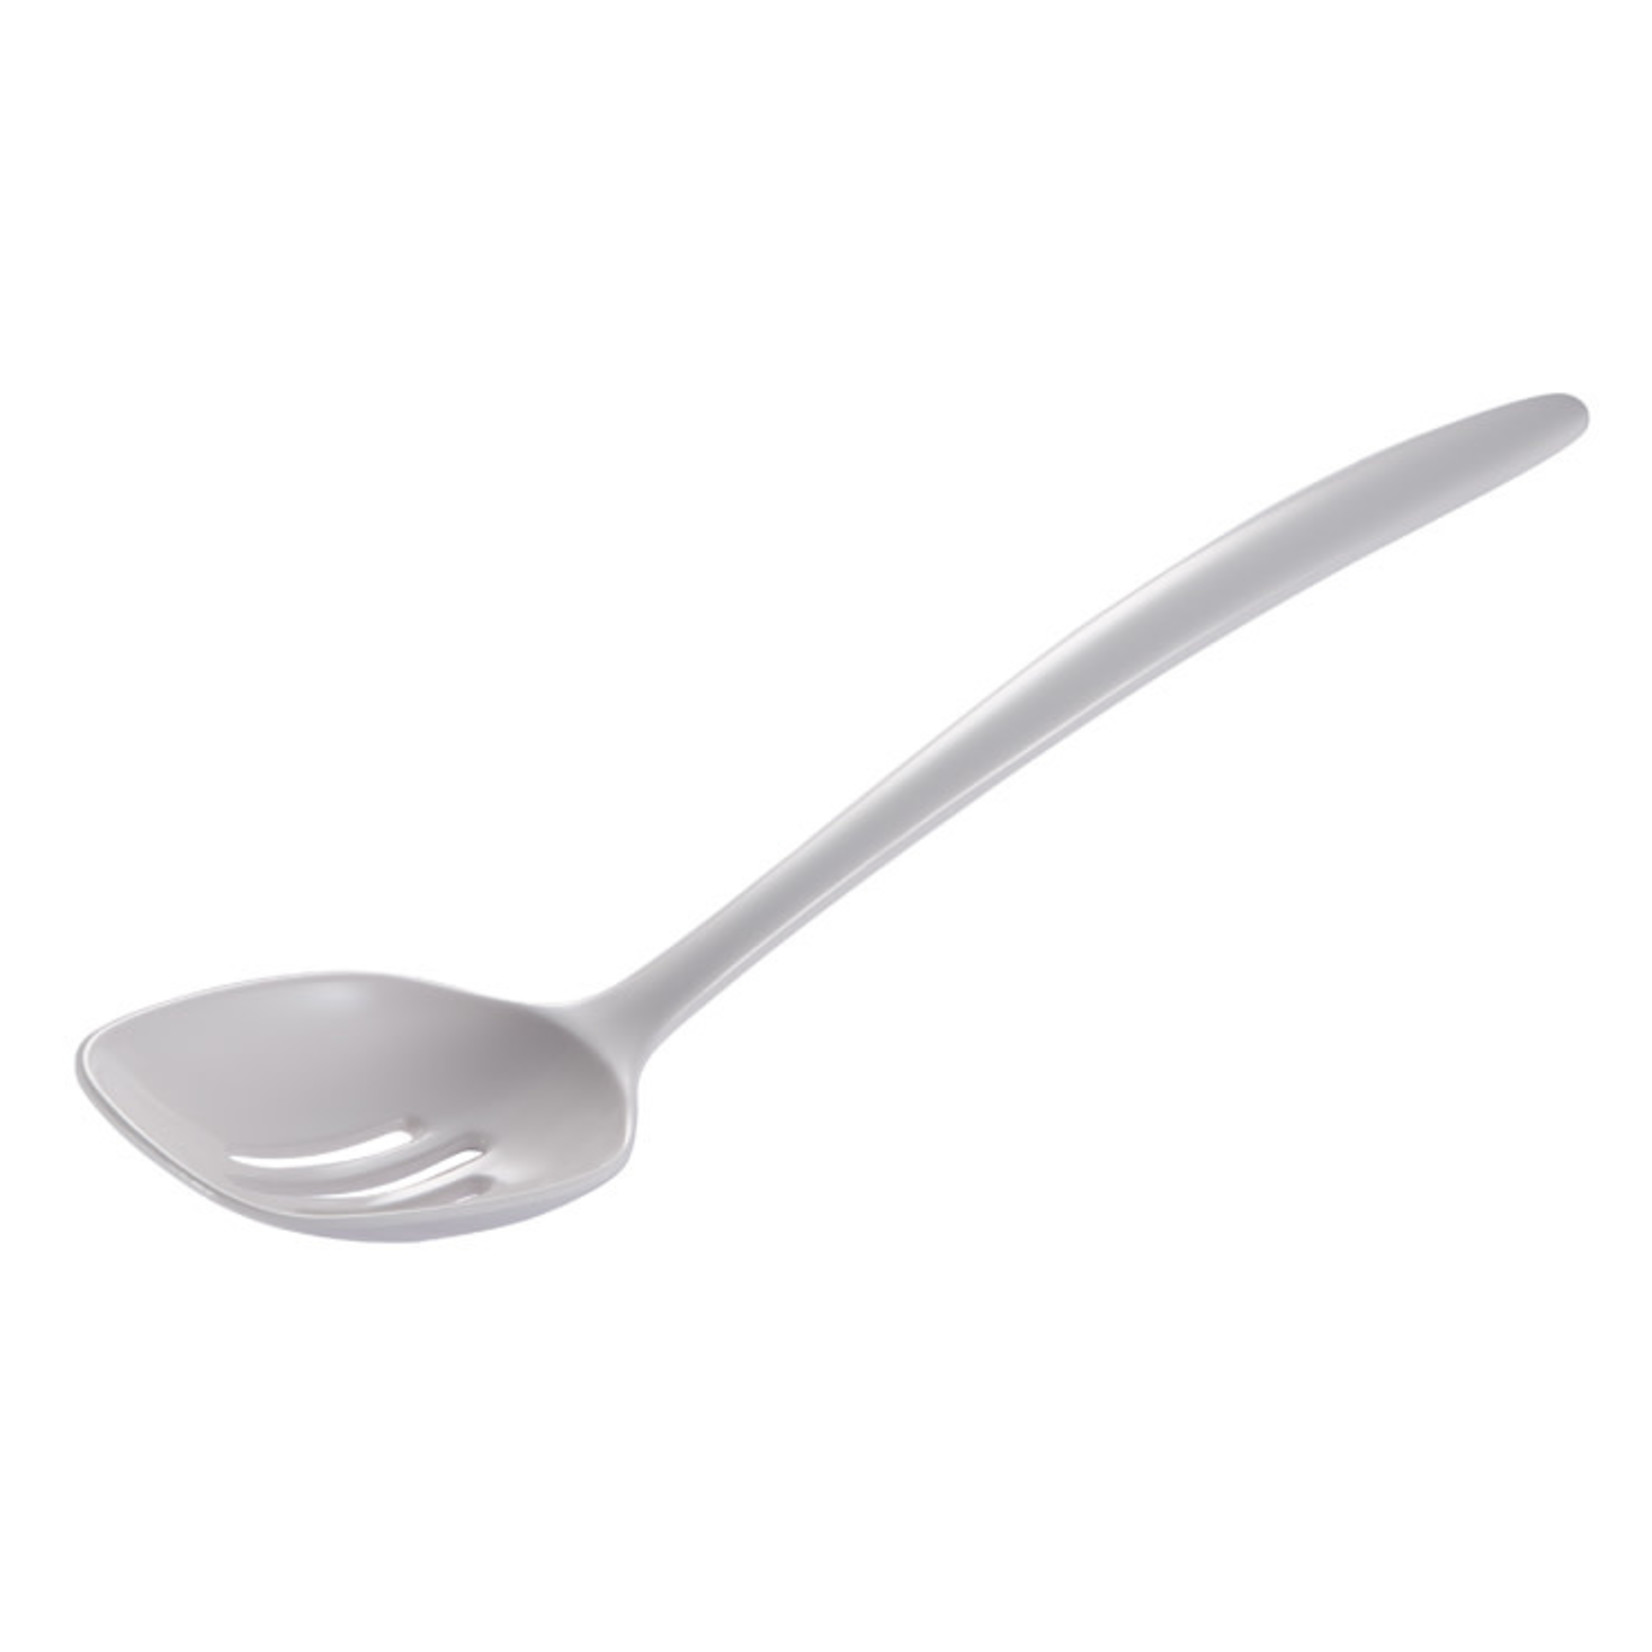 TWS 12" ASSORTED COLOR SLOTTED SPOON